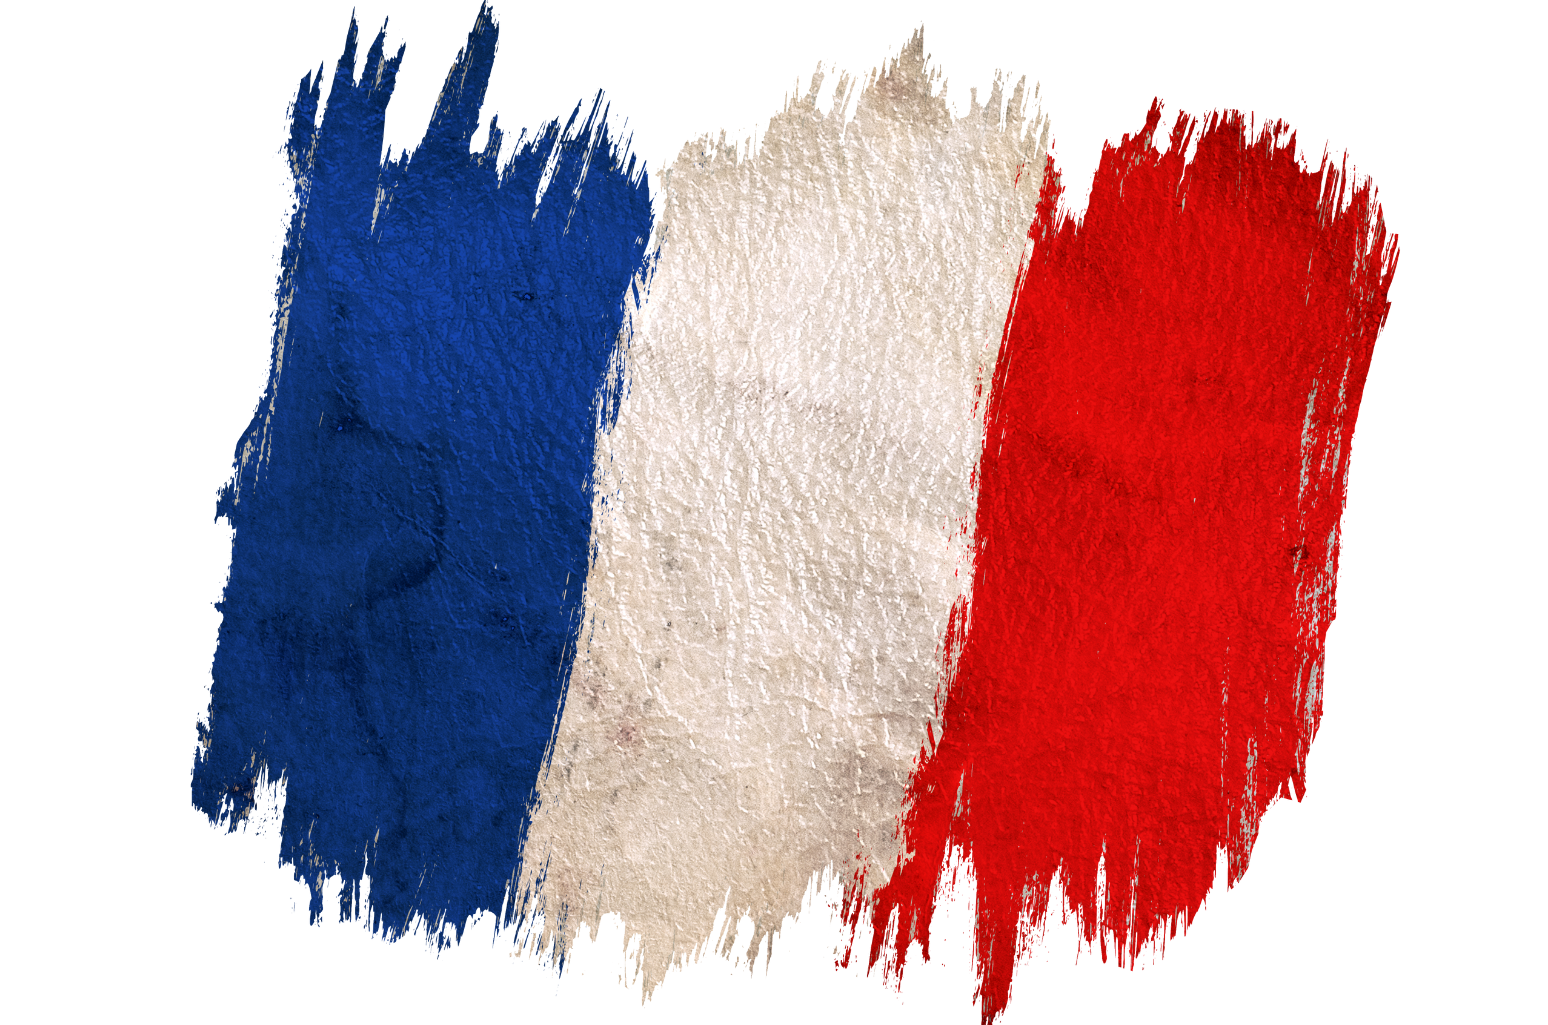 Product Exports to France Due to EPR Law Revision